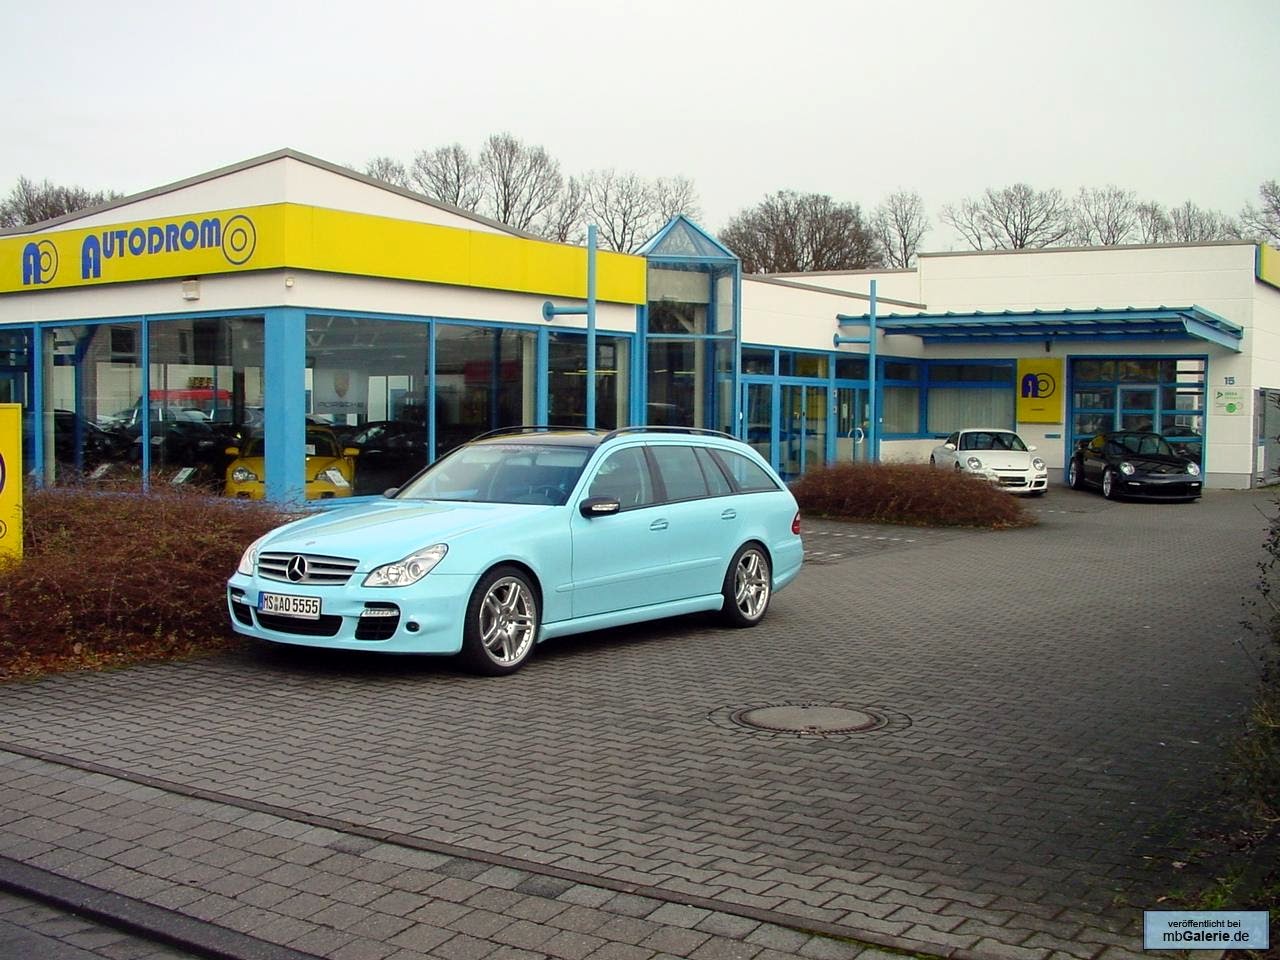 Mercedes_e55T_with_cls_face_blue_5.jpg